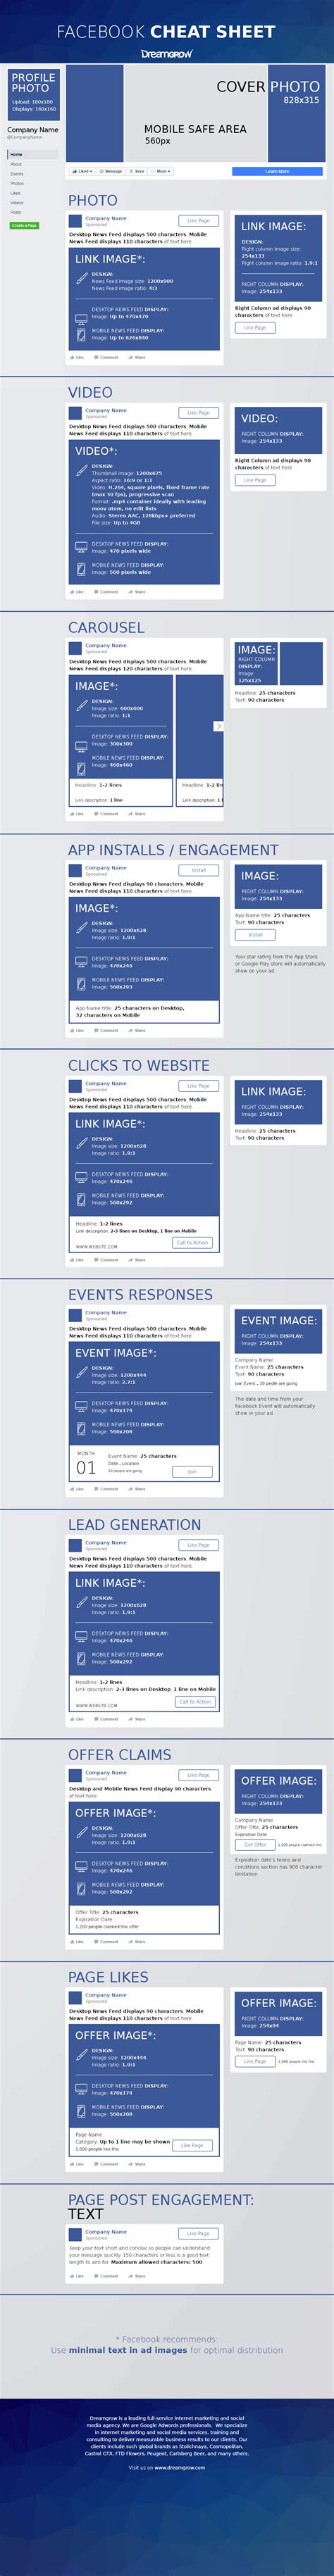 Facebook Image Sizes And Image Dimensions Cheat Sheet Brandongaillecom